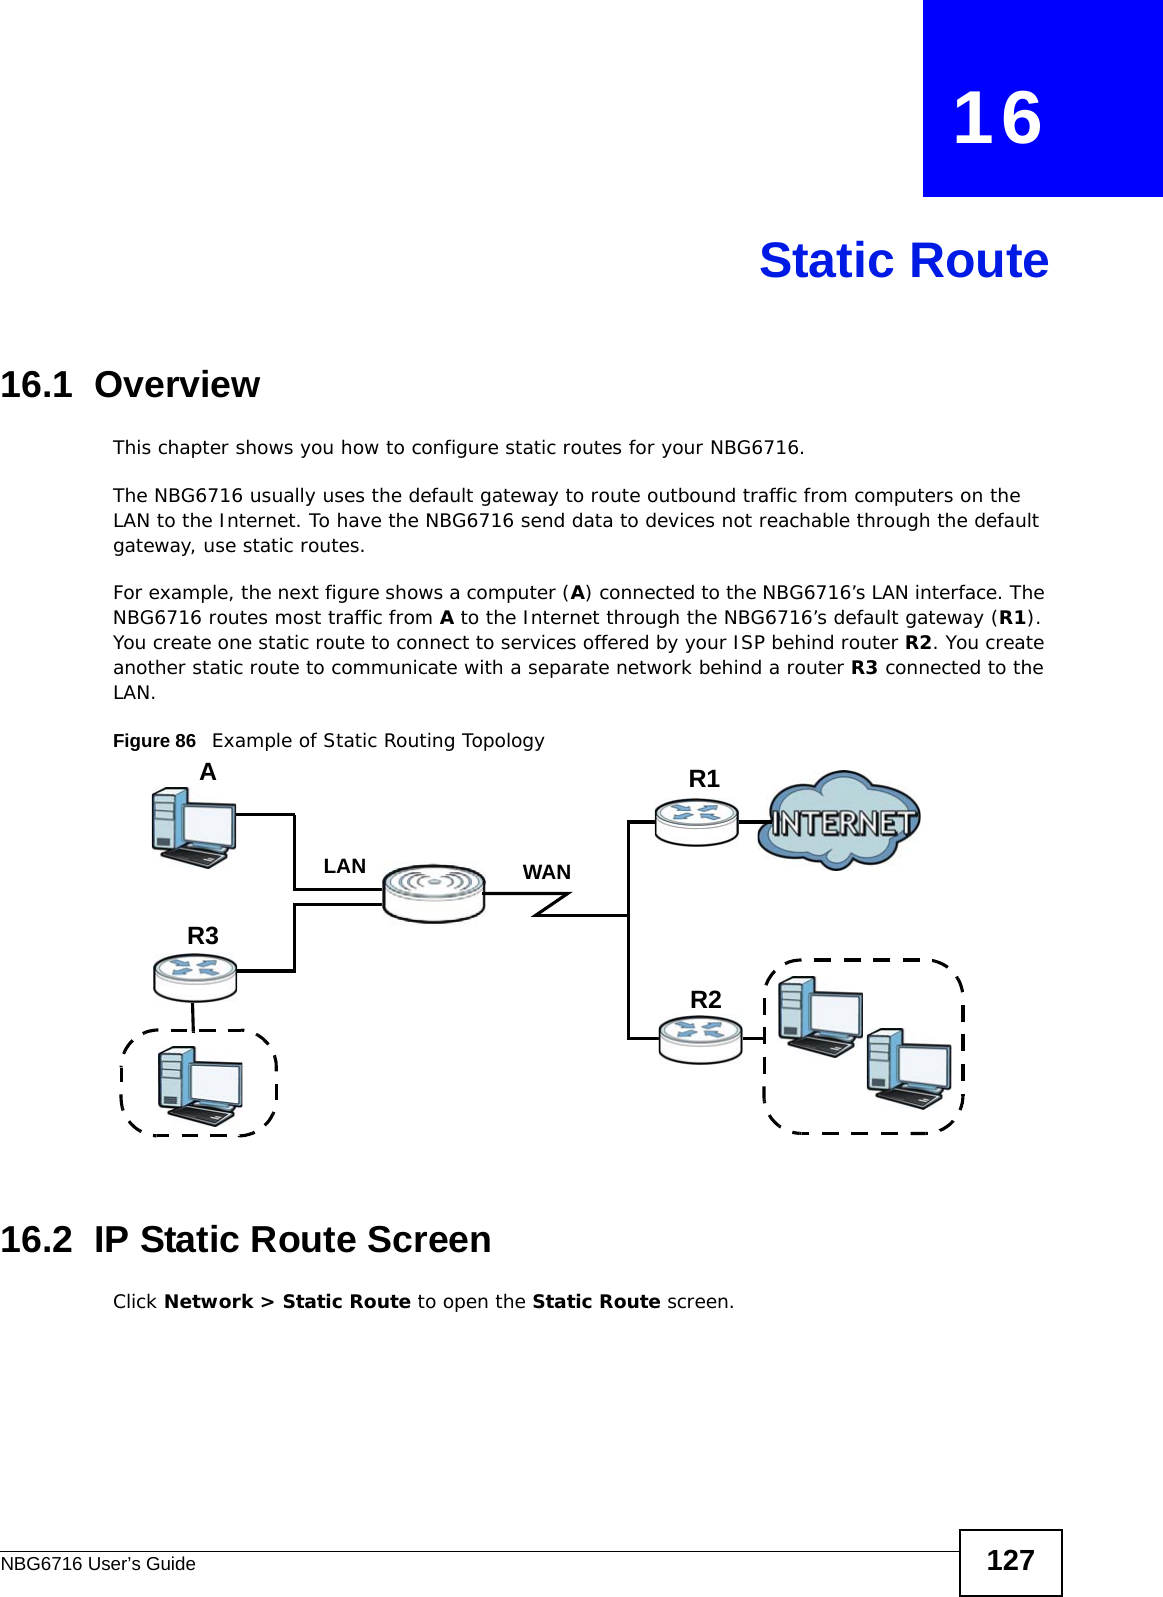 NBG6716 User’s Guide 127CHAPTER   16Static Route16.1  Overview   This chapter shows you how to configure static routes for your NBG6716.The NBG6716 usually uses the default gateway to route outbound traffic from computers on the LAN to the Internet. To have the NBG6716 send data to devices not reachable through the default gateway, use static routes.For example, the next figure shows a computer (A) connected to the NBG6716’s LAN interface. The NBG6716 routes most traffic from A to the Internet through the NBG6716’s default gateway (R1). You create one static route to connect to services offered by your ISP behind router R2. You create another static route to communicate with a separate network behind a router R3 connected to the LAN.Figure 86   Example of Static Routing Topology16.2  IP Static Route Screen Click Network &gt; Static Route to open the Static Route screen. WANR1R2AR3LAN